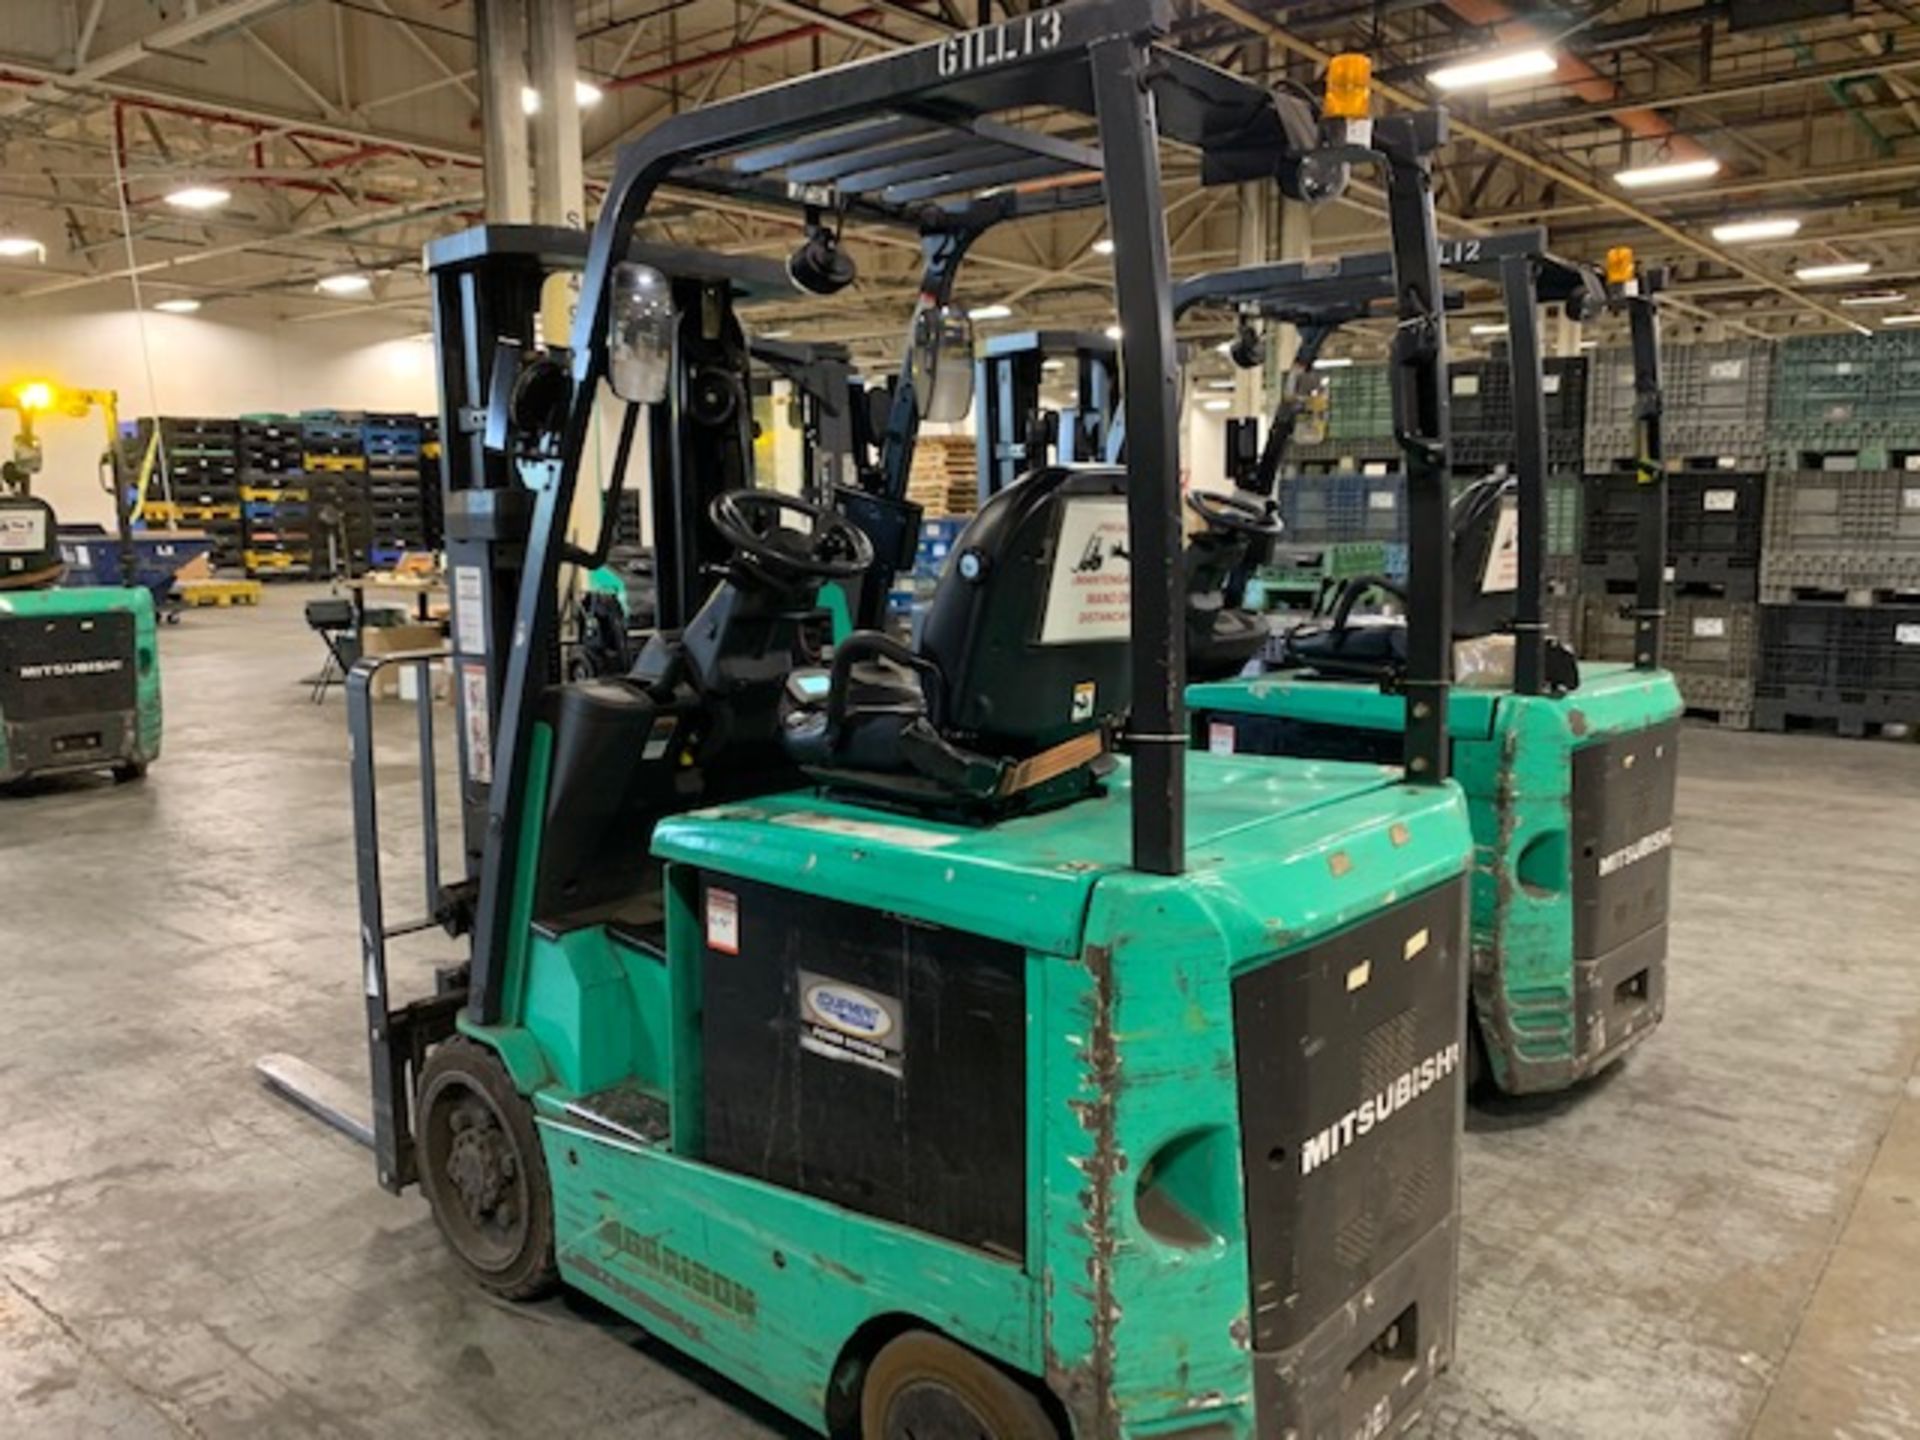 2016 Mitsubishi FBC25N2 Forklift to include Builders Mod - Image 3 of 4